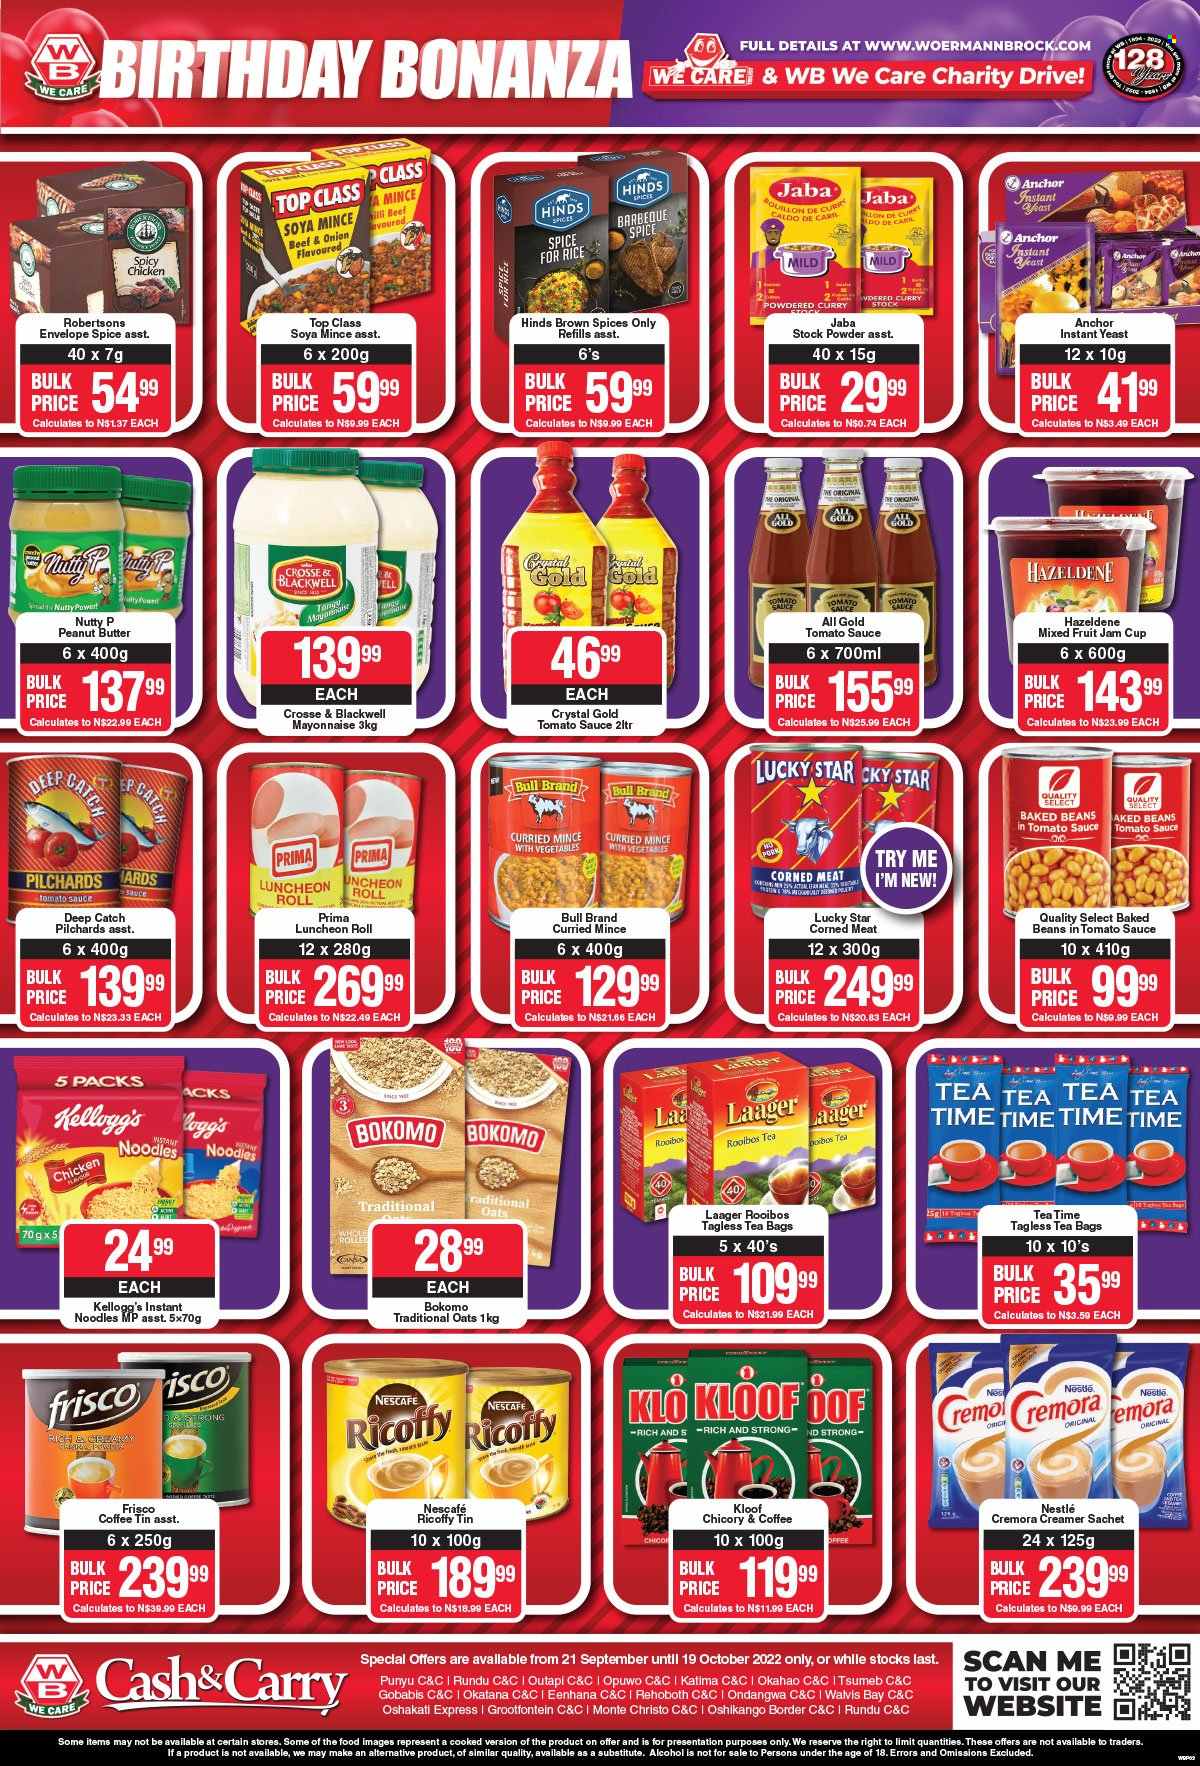 thumbnail - Woermann Brock catalogue  - 21/09/2022 - 19/10/2022 - Sales products - sardines, instant noodles, noodles, lunch meat, shake, yeast, Anchor, creamer, mayonnaise, Nestlé, Kellogg's, oats, Cremora, soya mince, corned meat, baked beans, rice, spice, Hinds, fruit jam, peanut butter, Hazeldene, tea bags, rooibos tea, coffee, Ricoffy, Nescafé, Frisco, alcohol. Page 3.